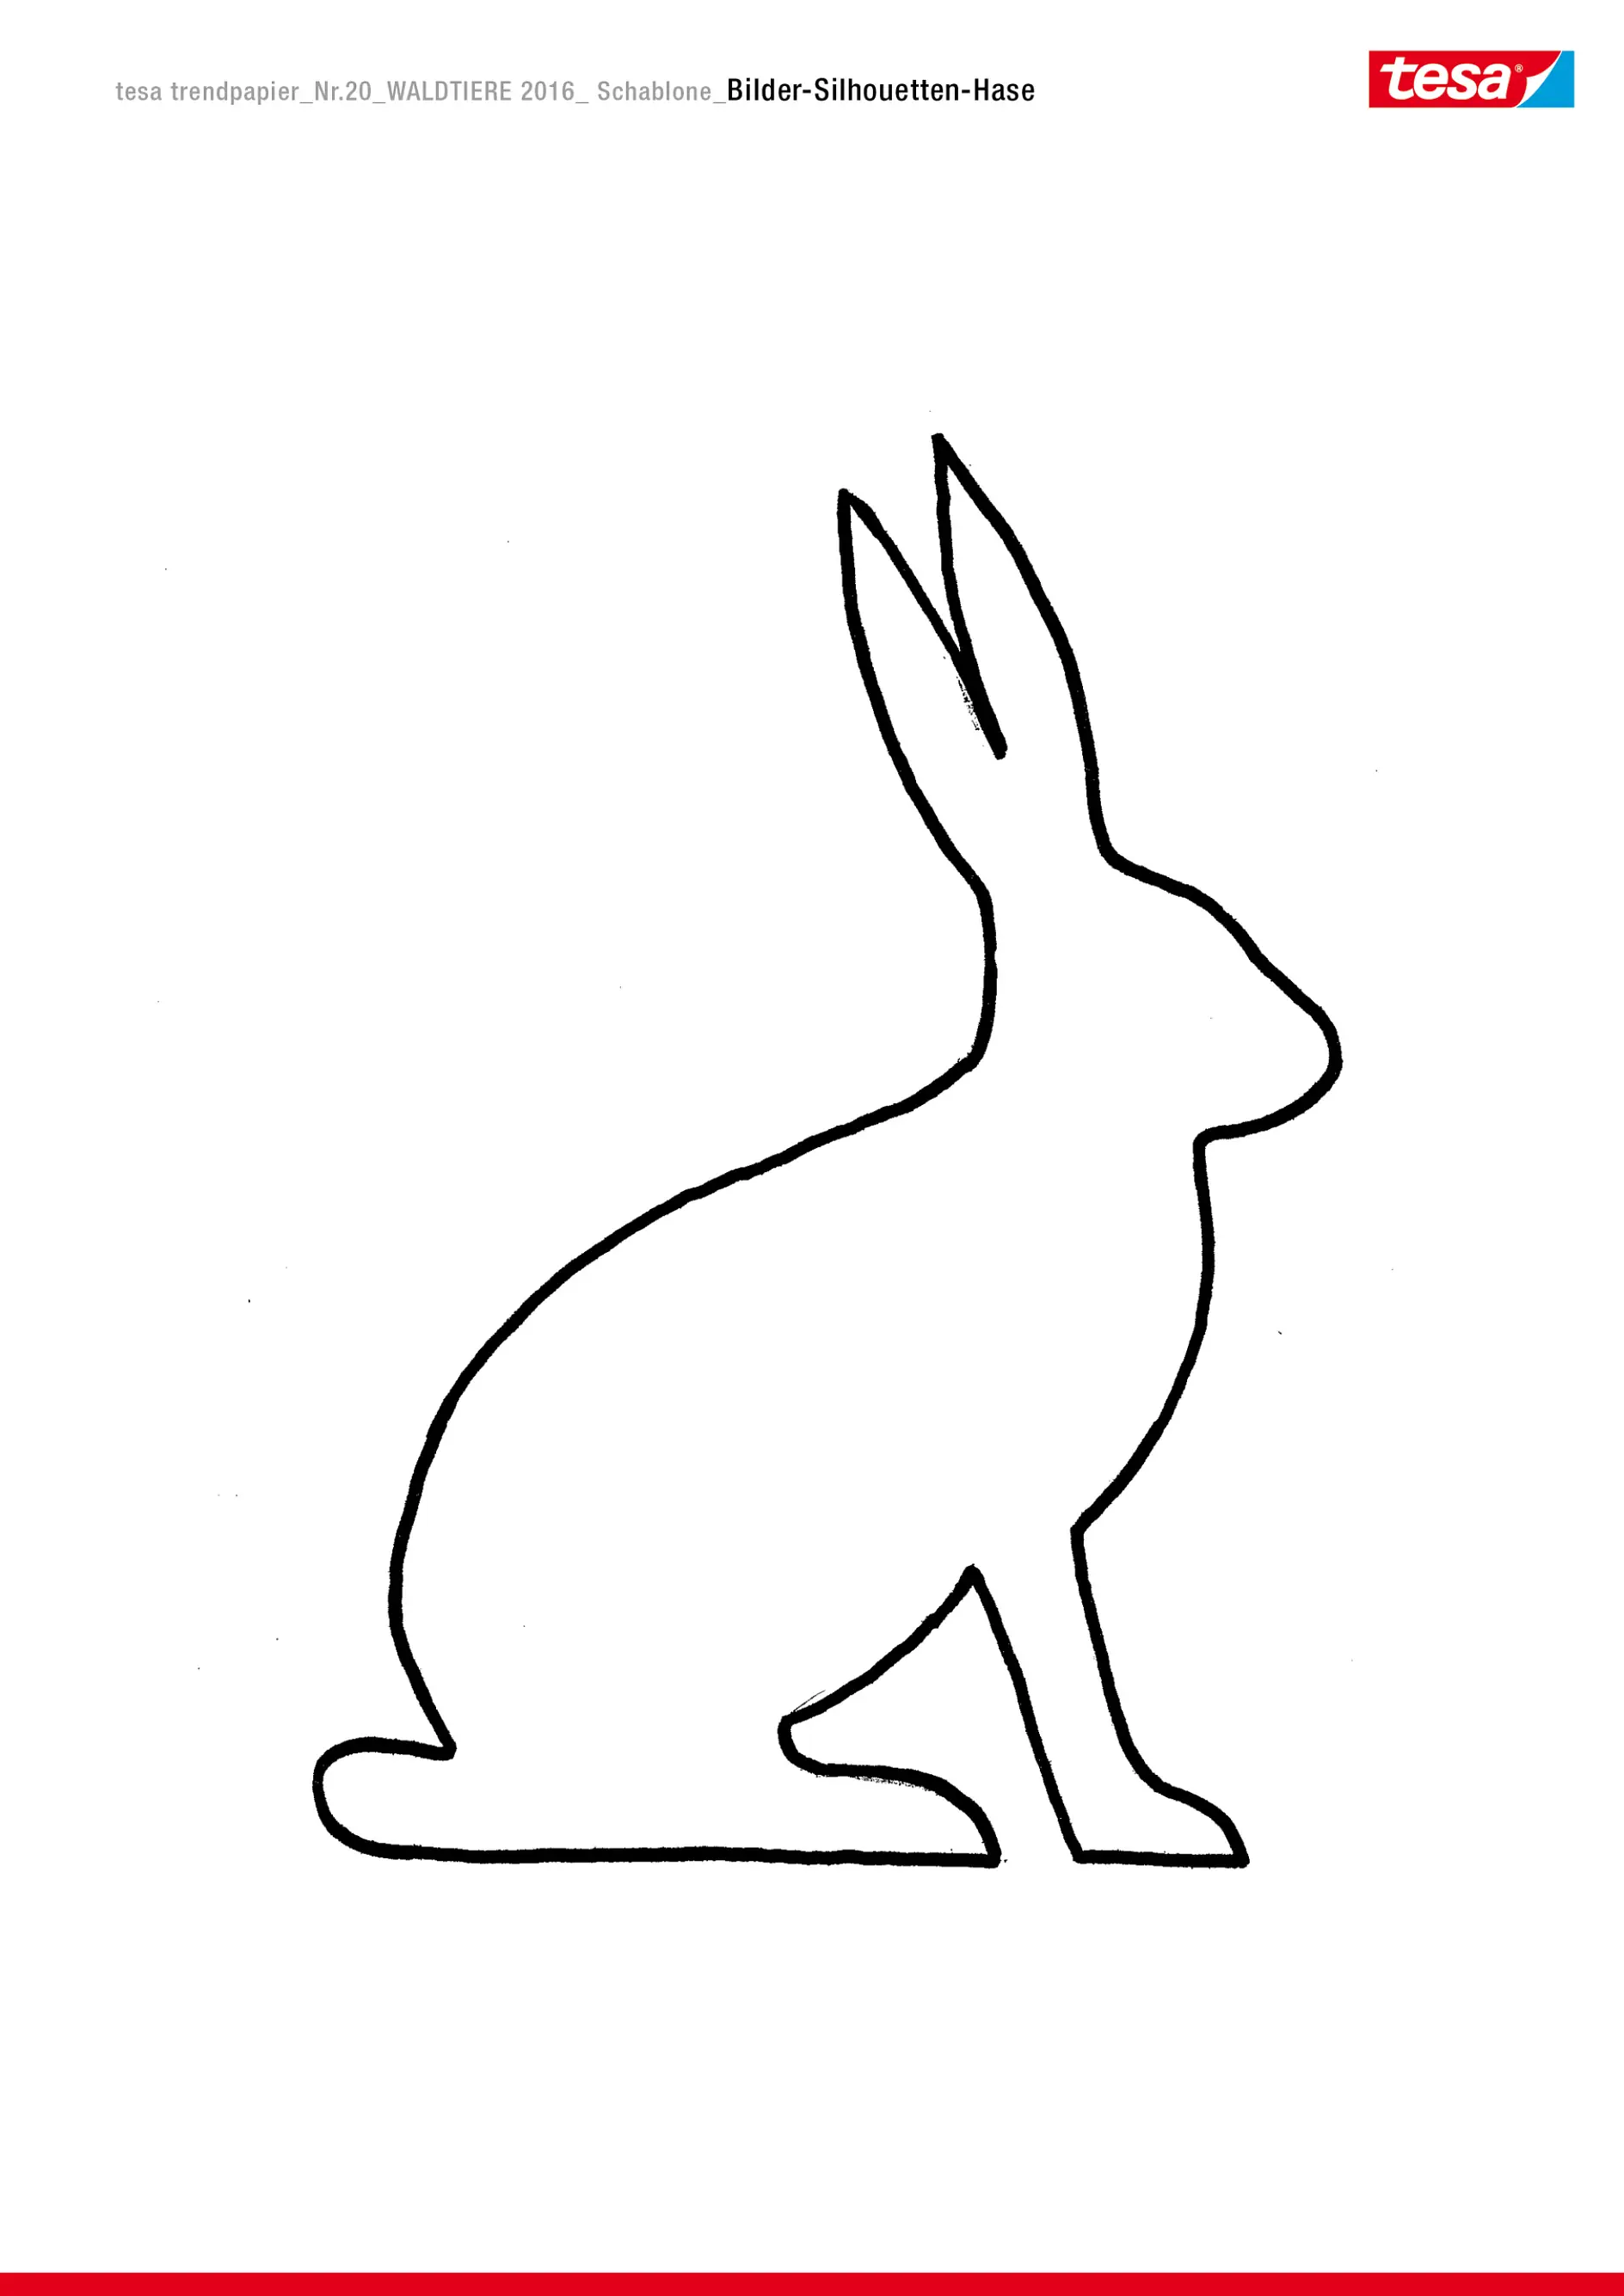 The rabbit template can be used to create an individual photo frame design in only a few steps.